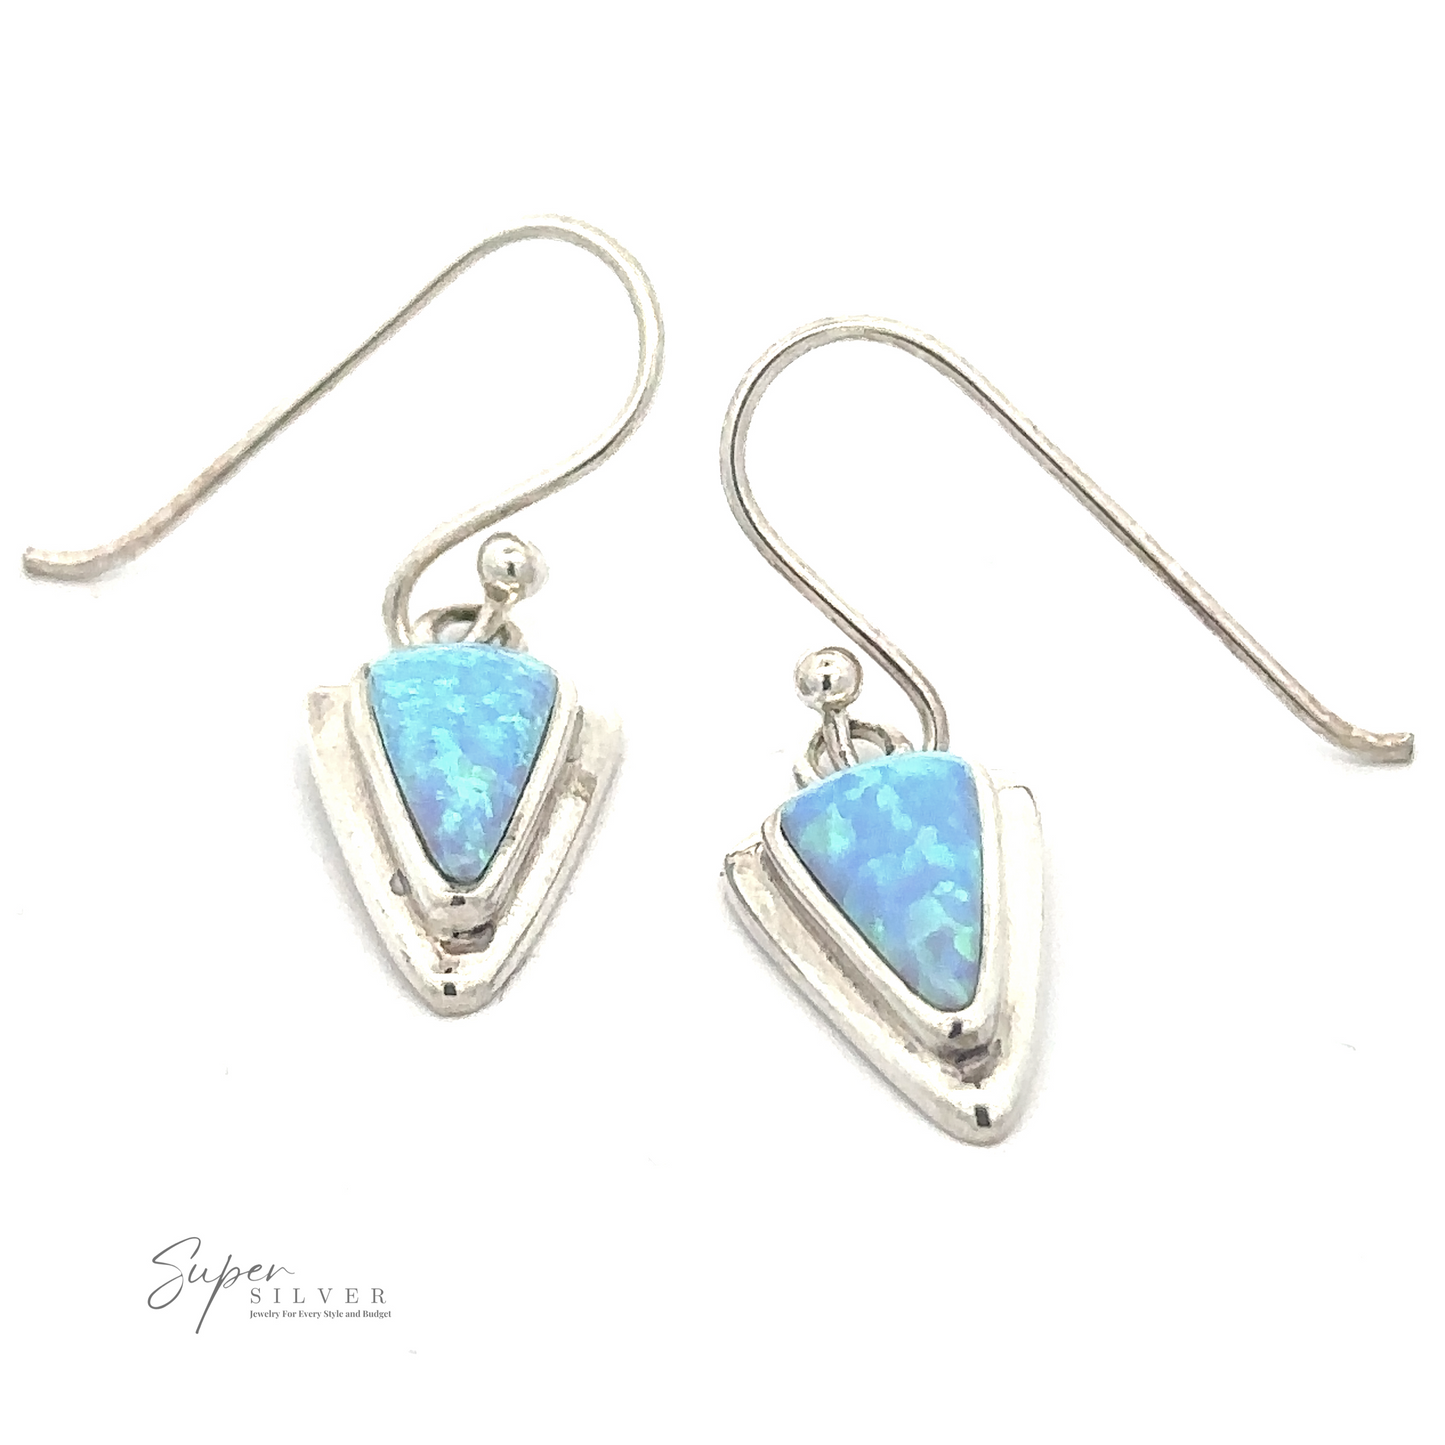 A pair of Blue Created Opal Triangle Earrings with triangular lab-created blue opal stones set in a silver frame, displayed on a white background. The branding "Super Silver" is visible at the bottom left corner.